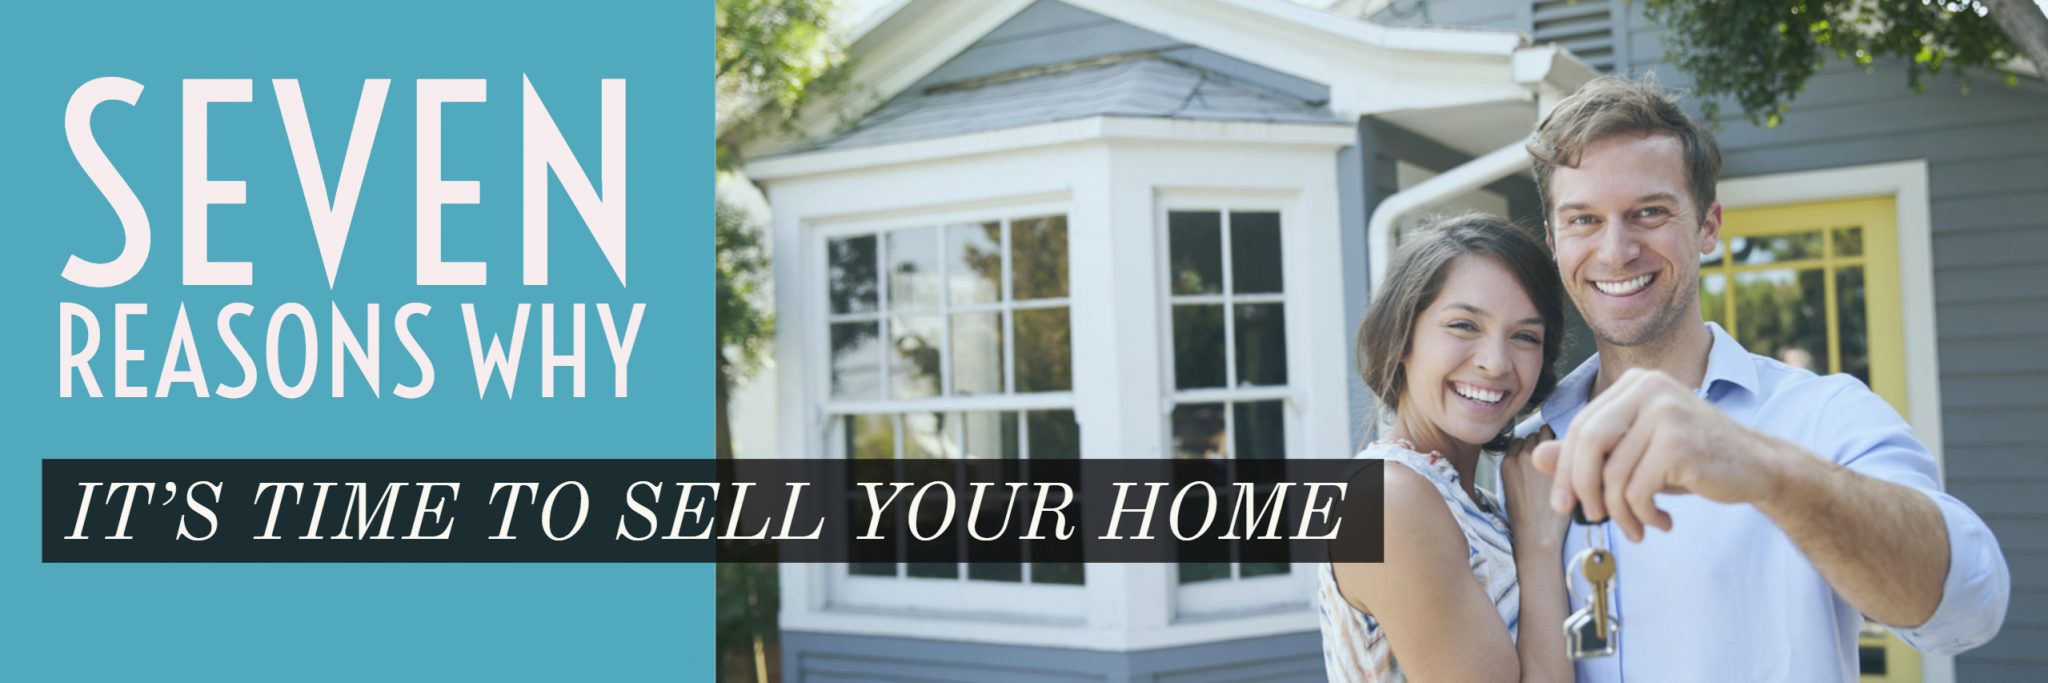 Seven Reasons Why It's Time To Sell Your Home